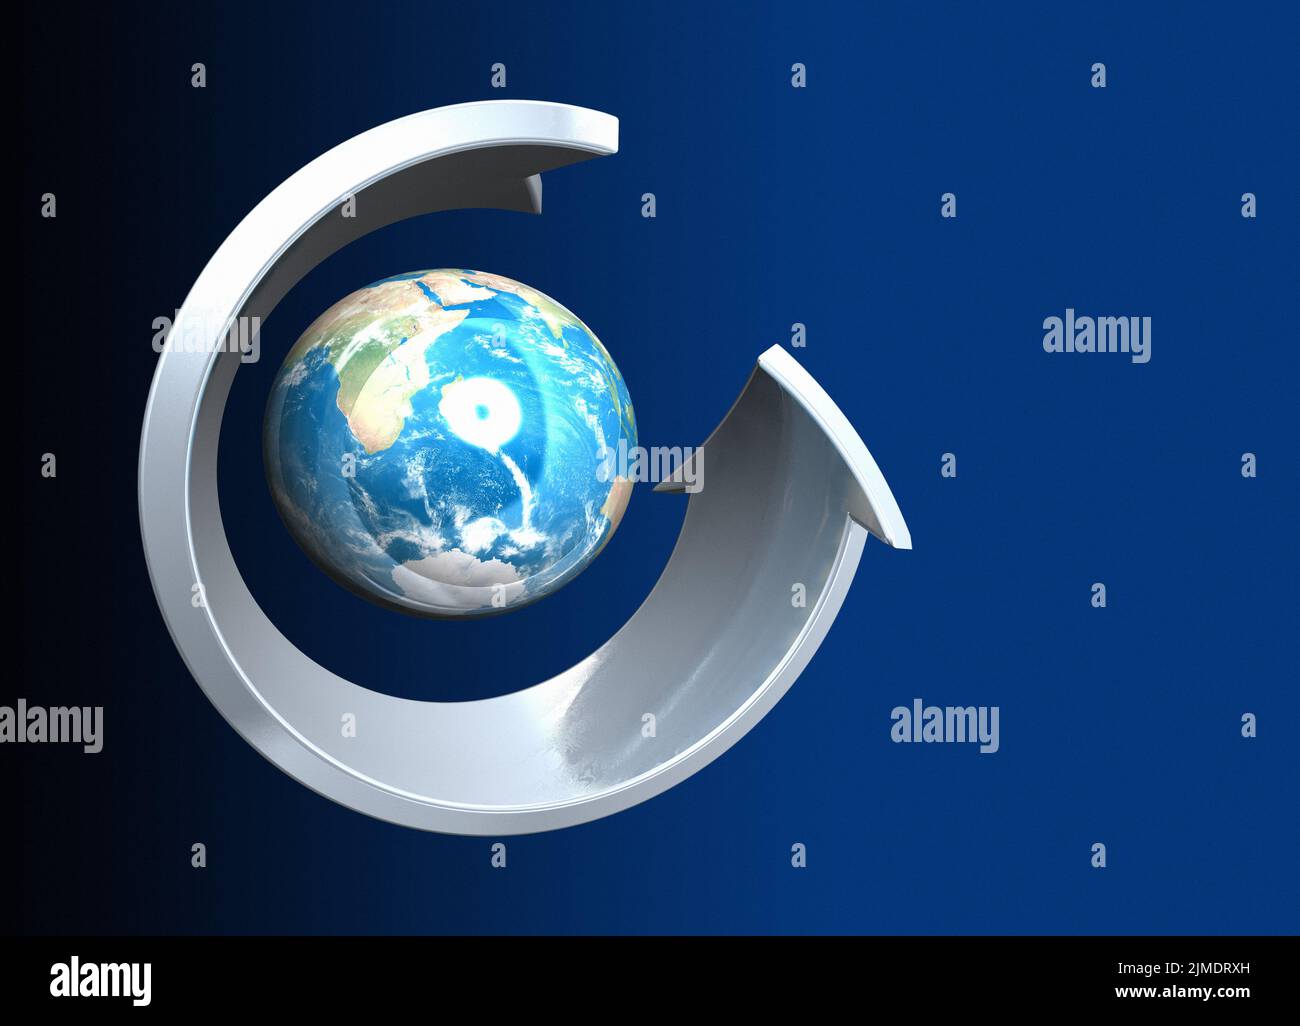 Earth and direction sign, illustration Stock Photo